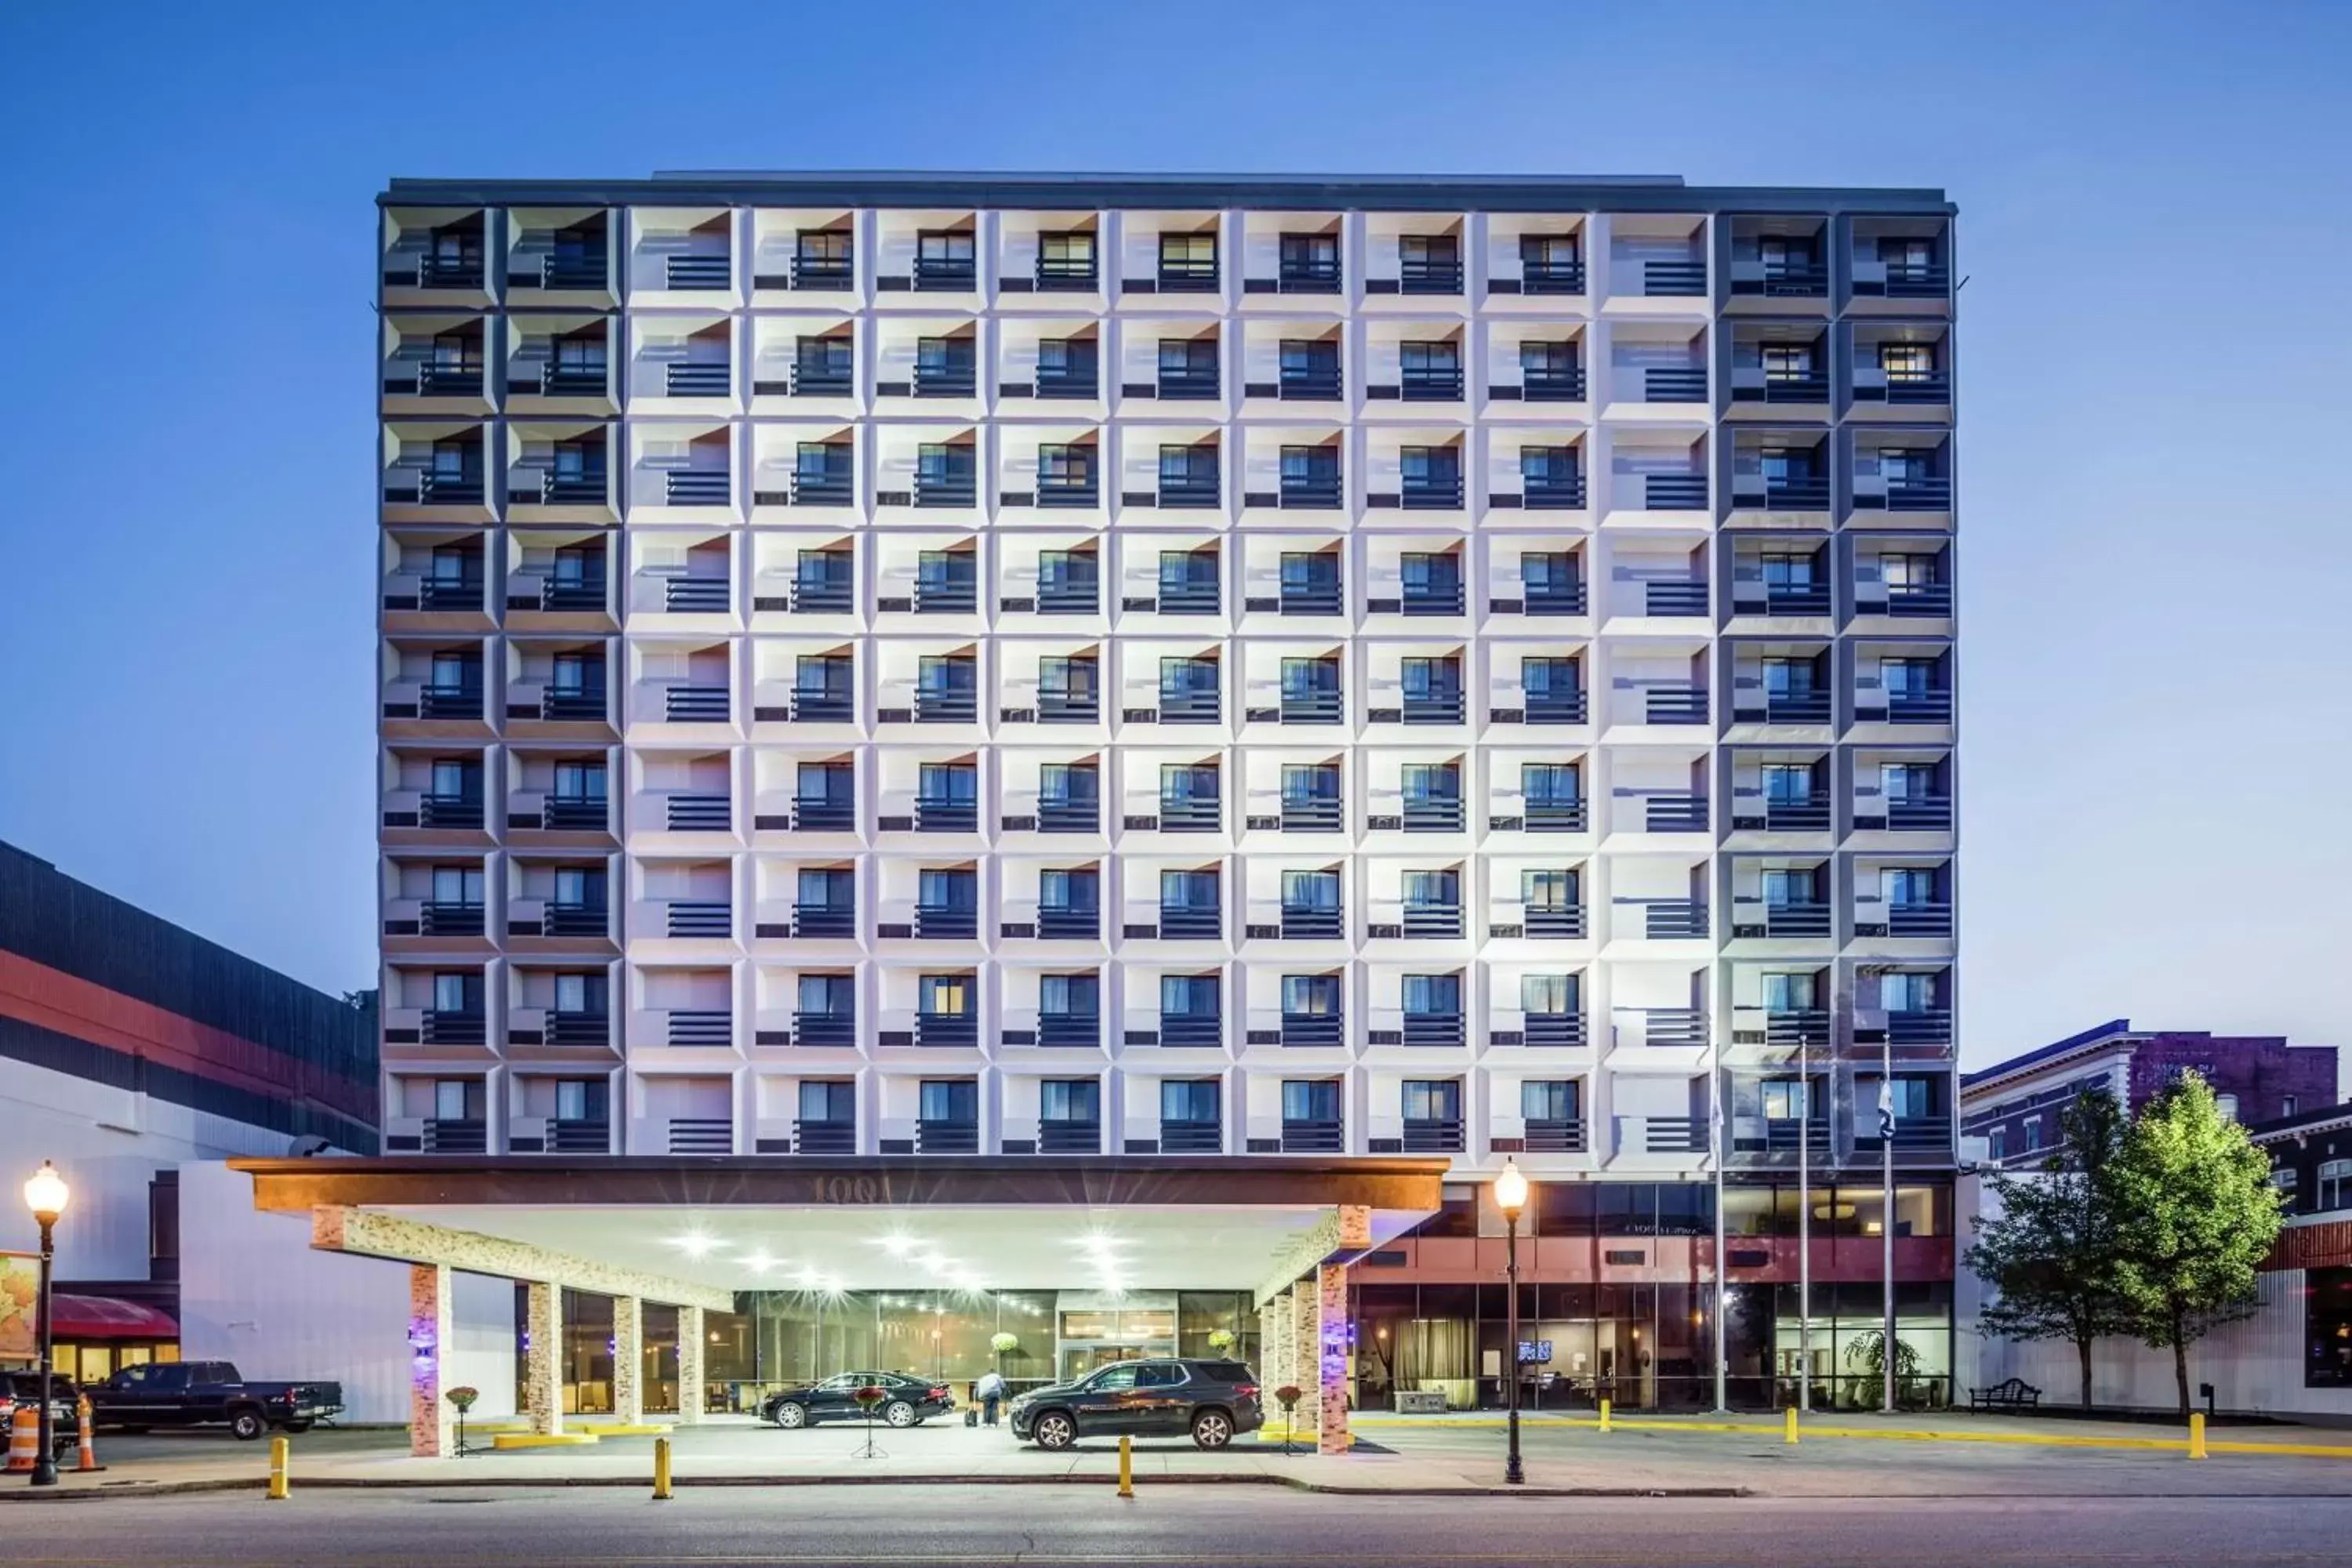 Property Building in DoubleTree by Hilton Huntington, WV